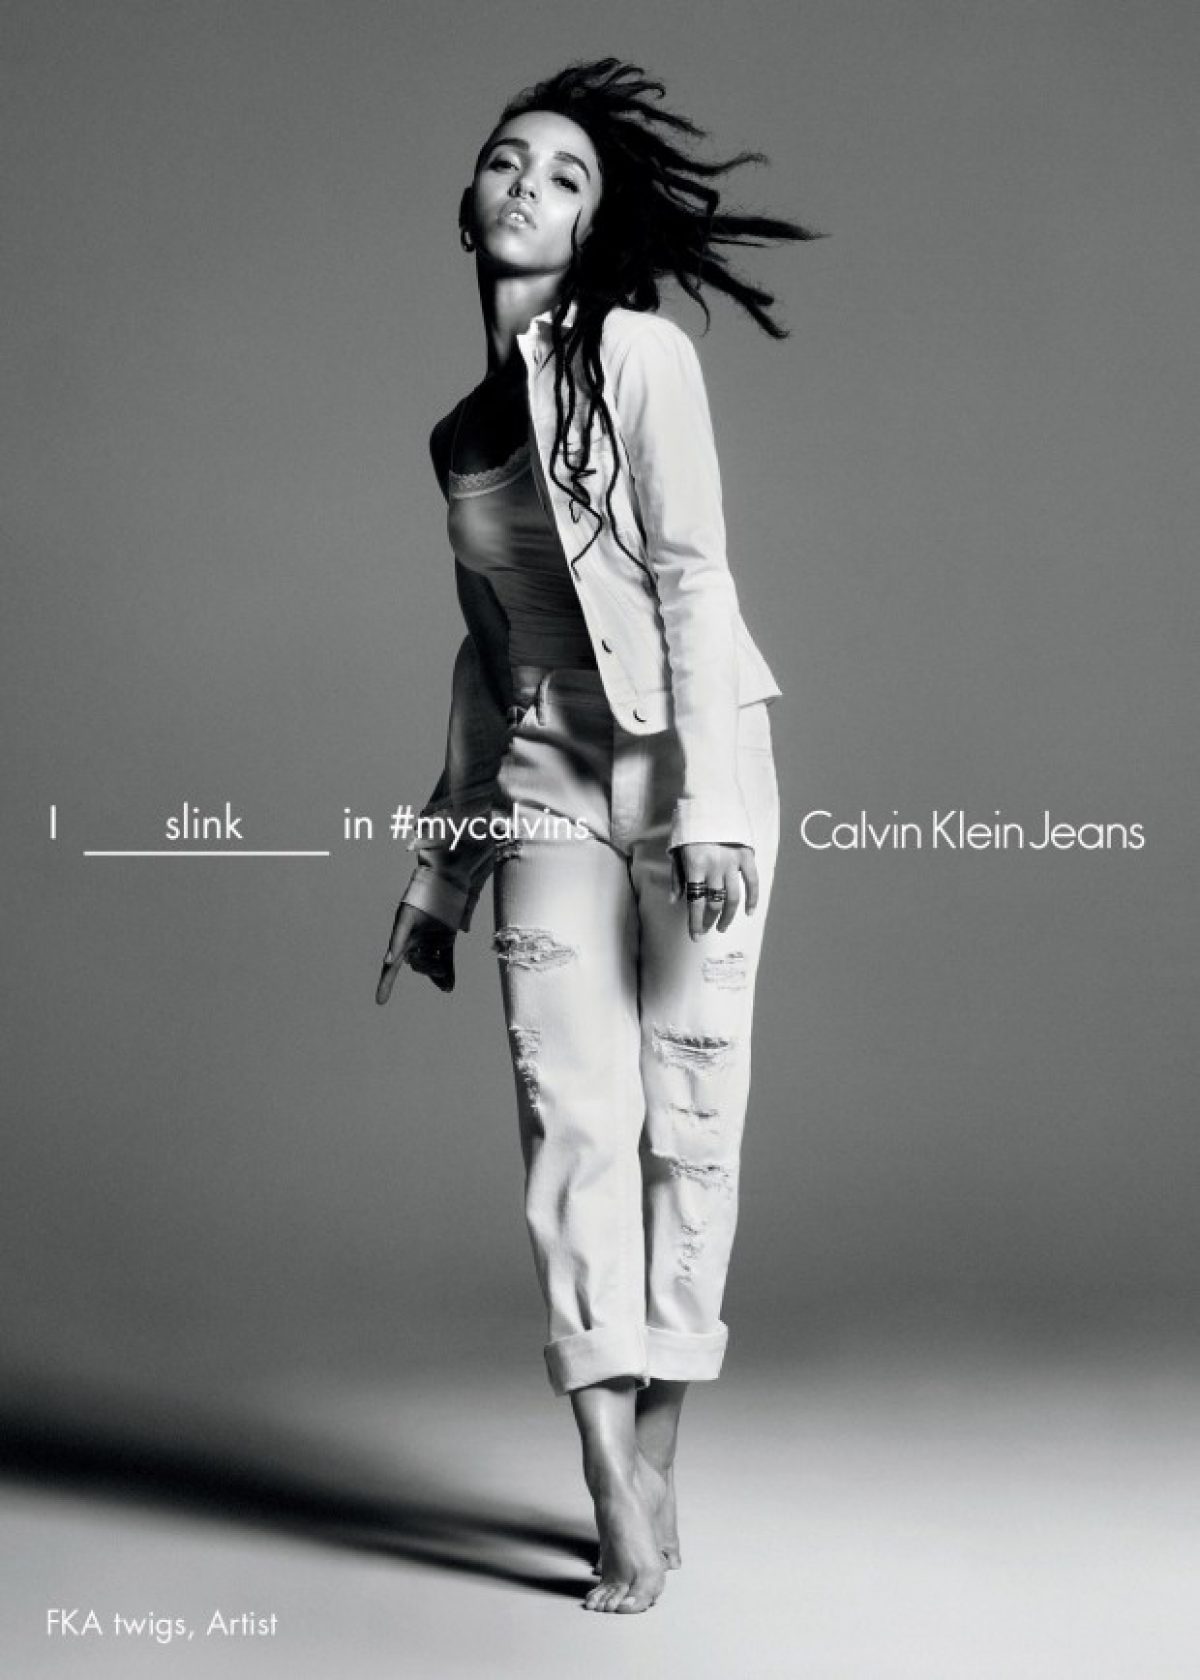 See FKA twigs' full Calvin Klein campaign